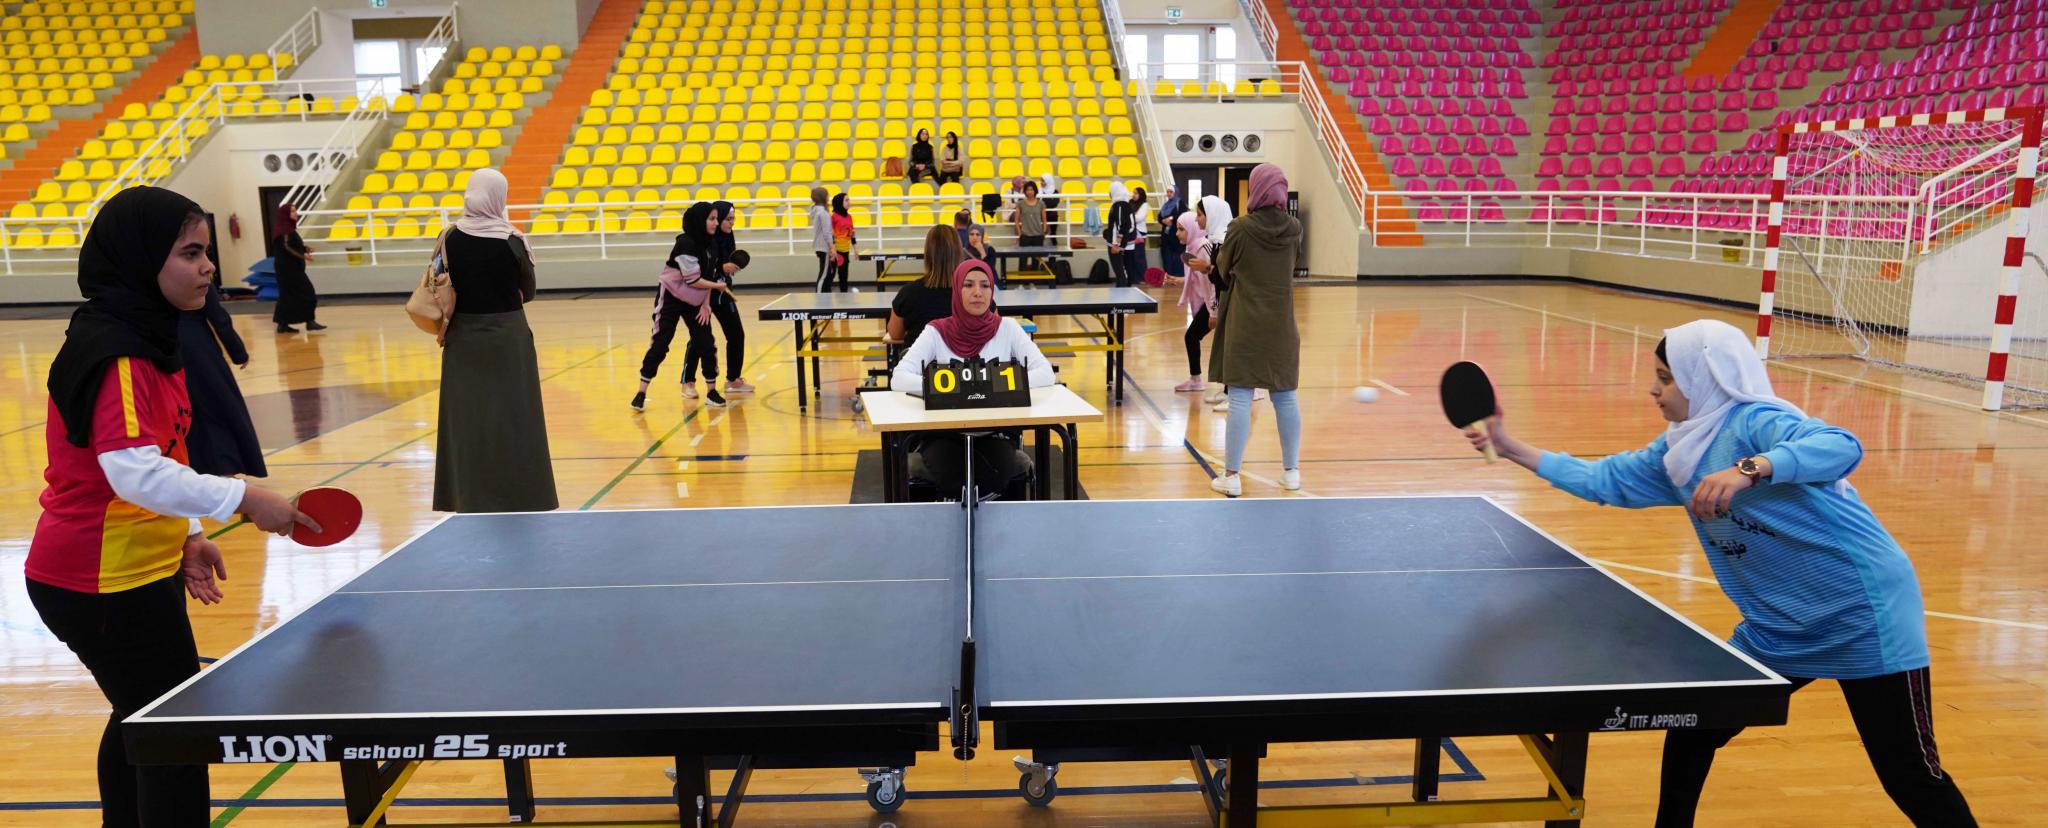 AAUP Hosts a Table Tennis Championship for Males and Females